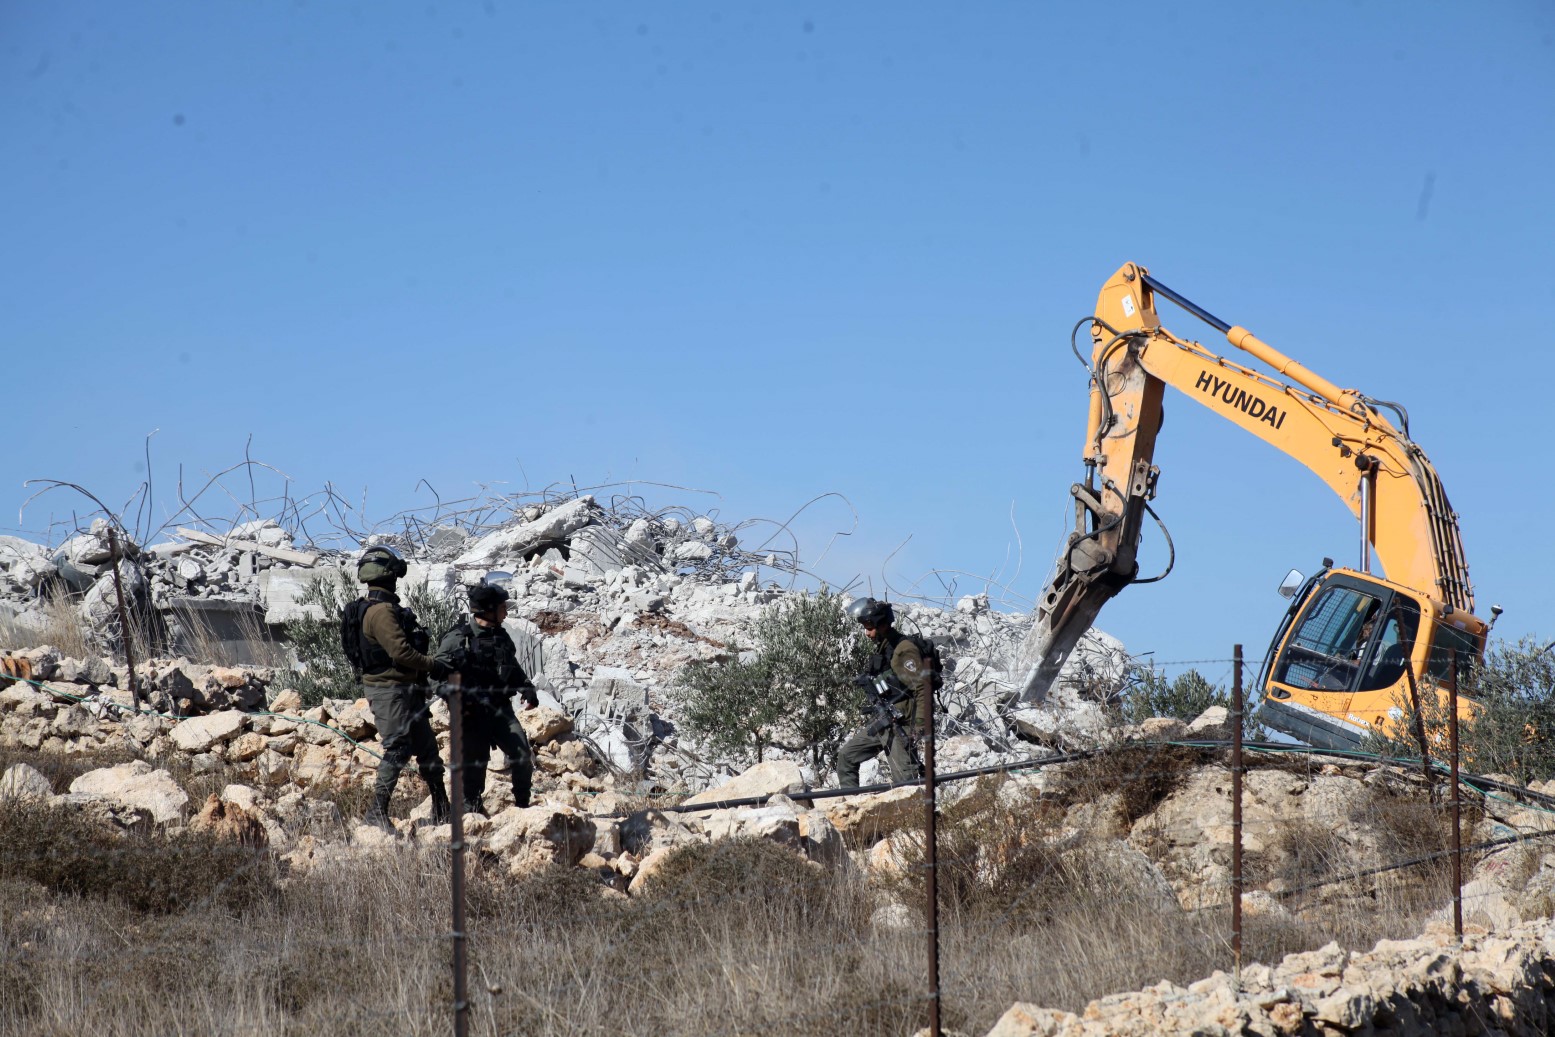 UN: Israel demolished 31 Palestinian structures in past two weeks